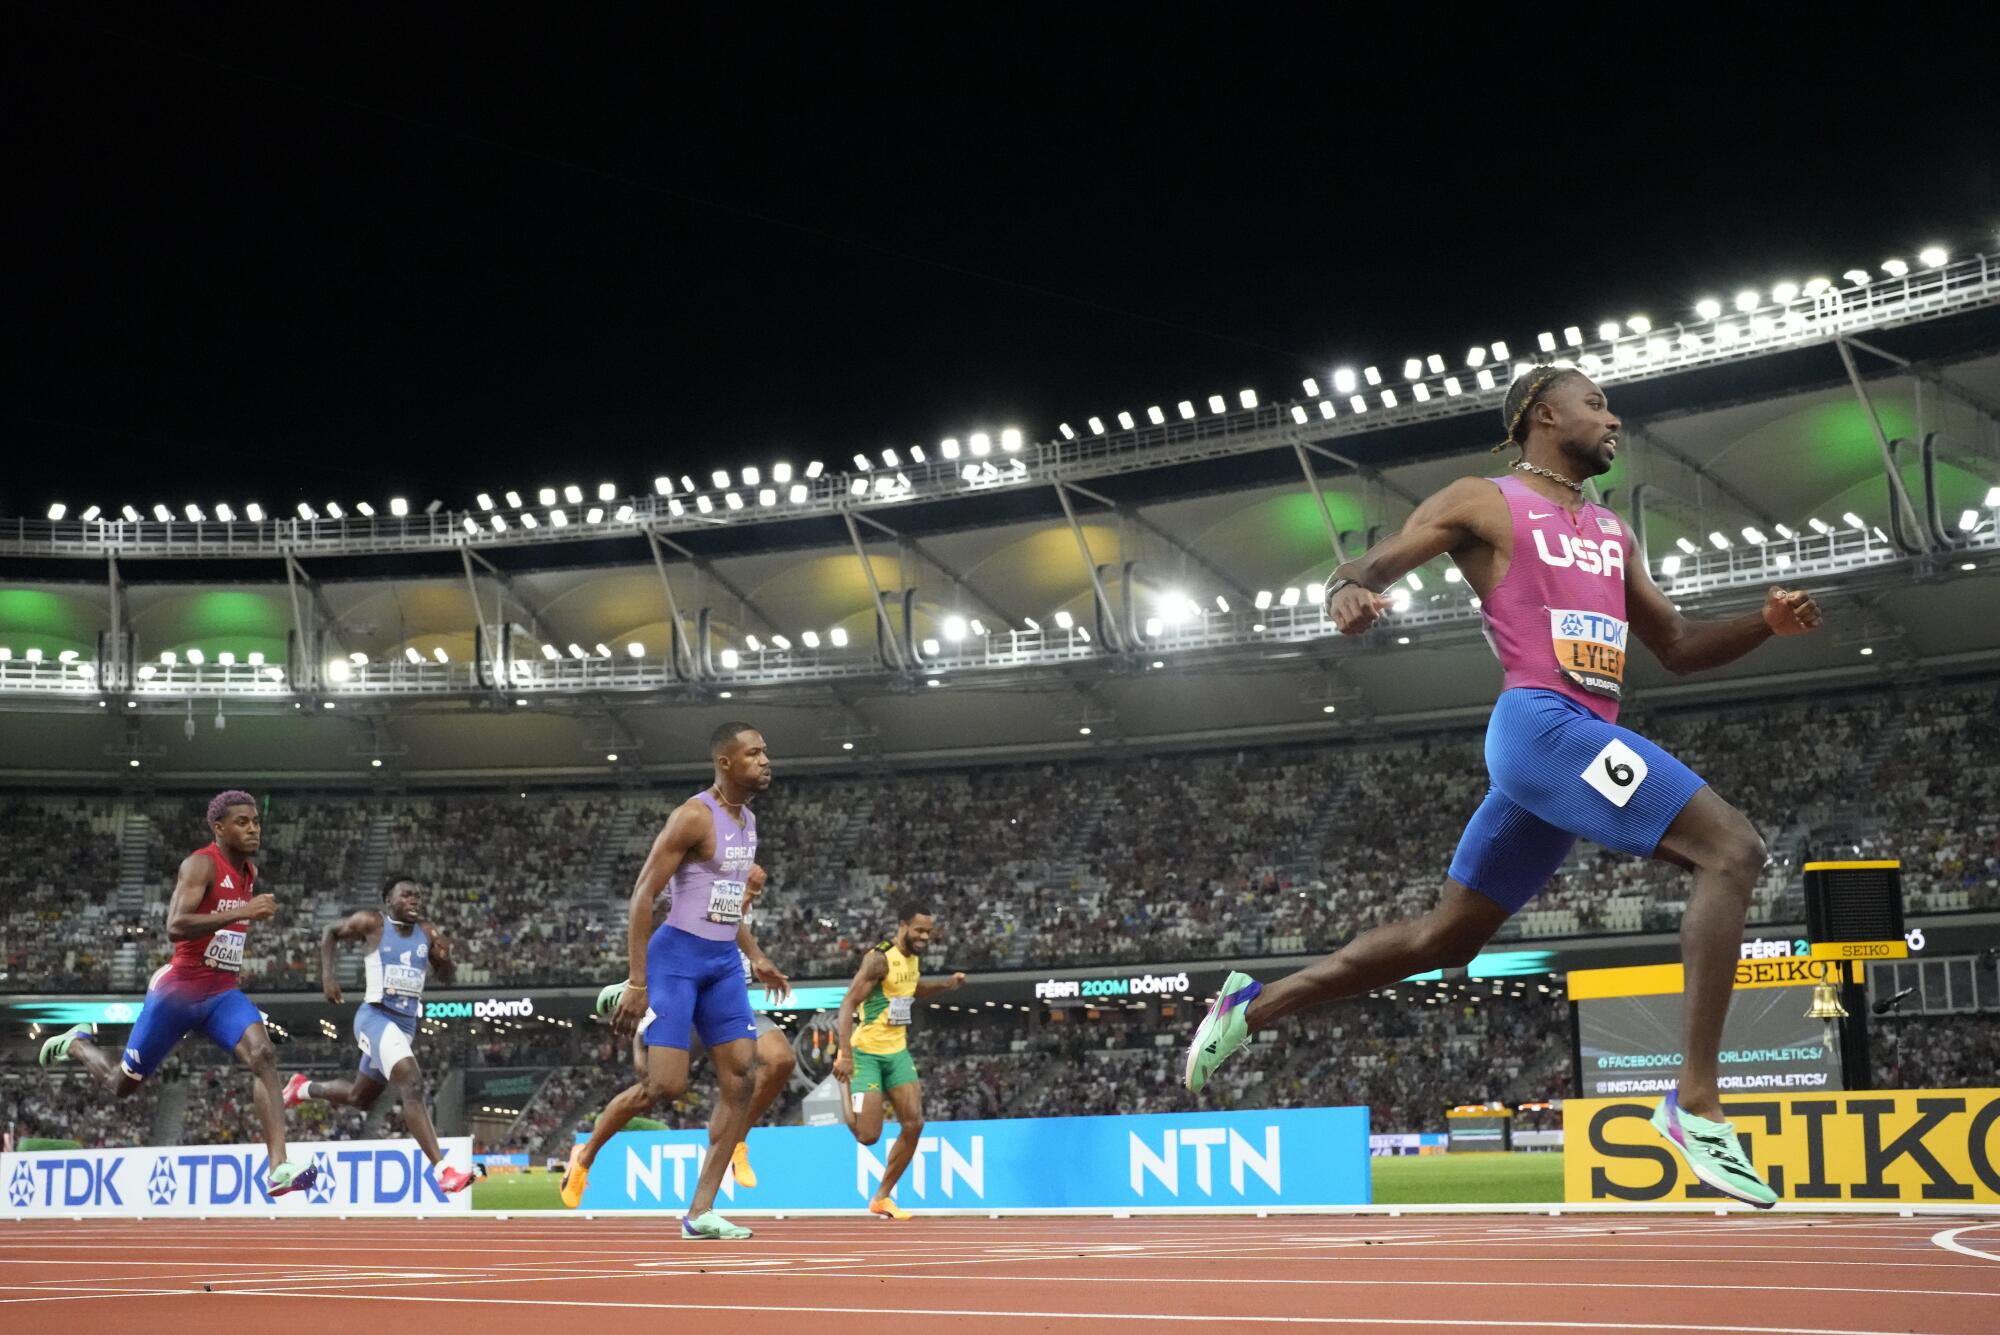 Noah Lyles crosses the finish line to win the men's 200 meters at the World Athletics Championships on Aug. 25.